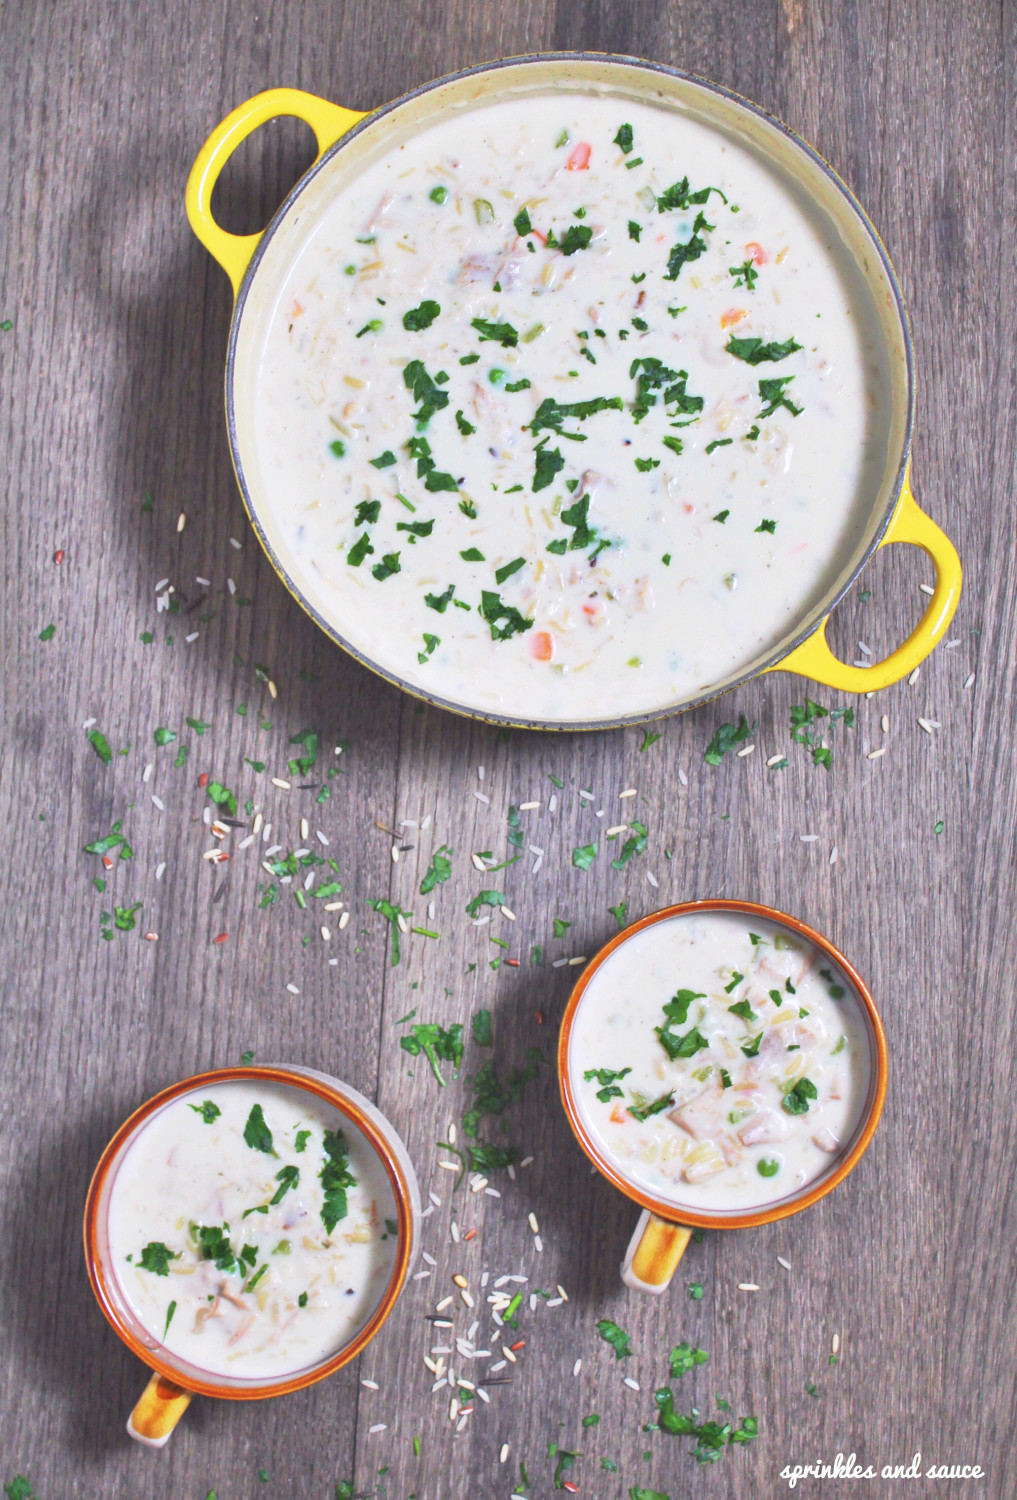 Cream of Chicken and Wild Rice Soup